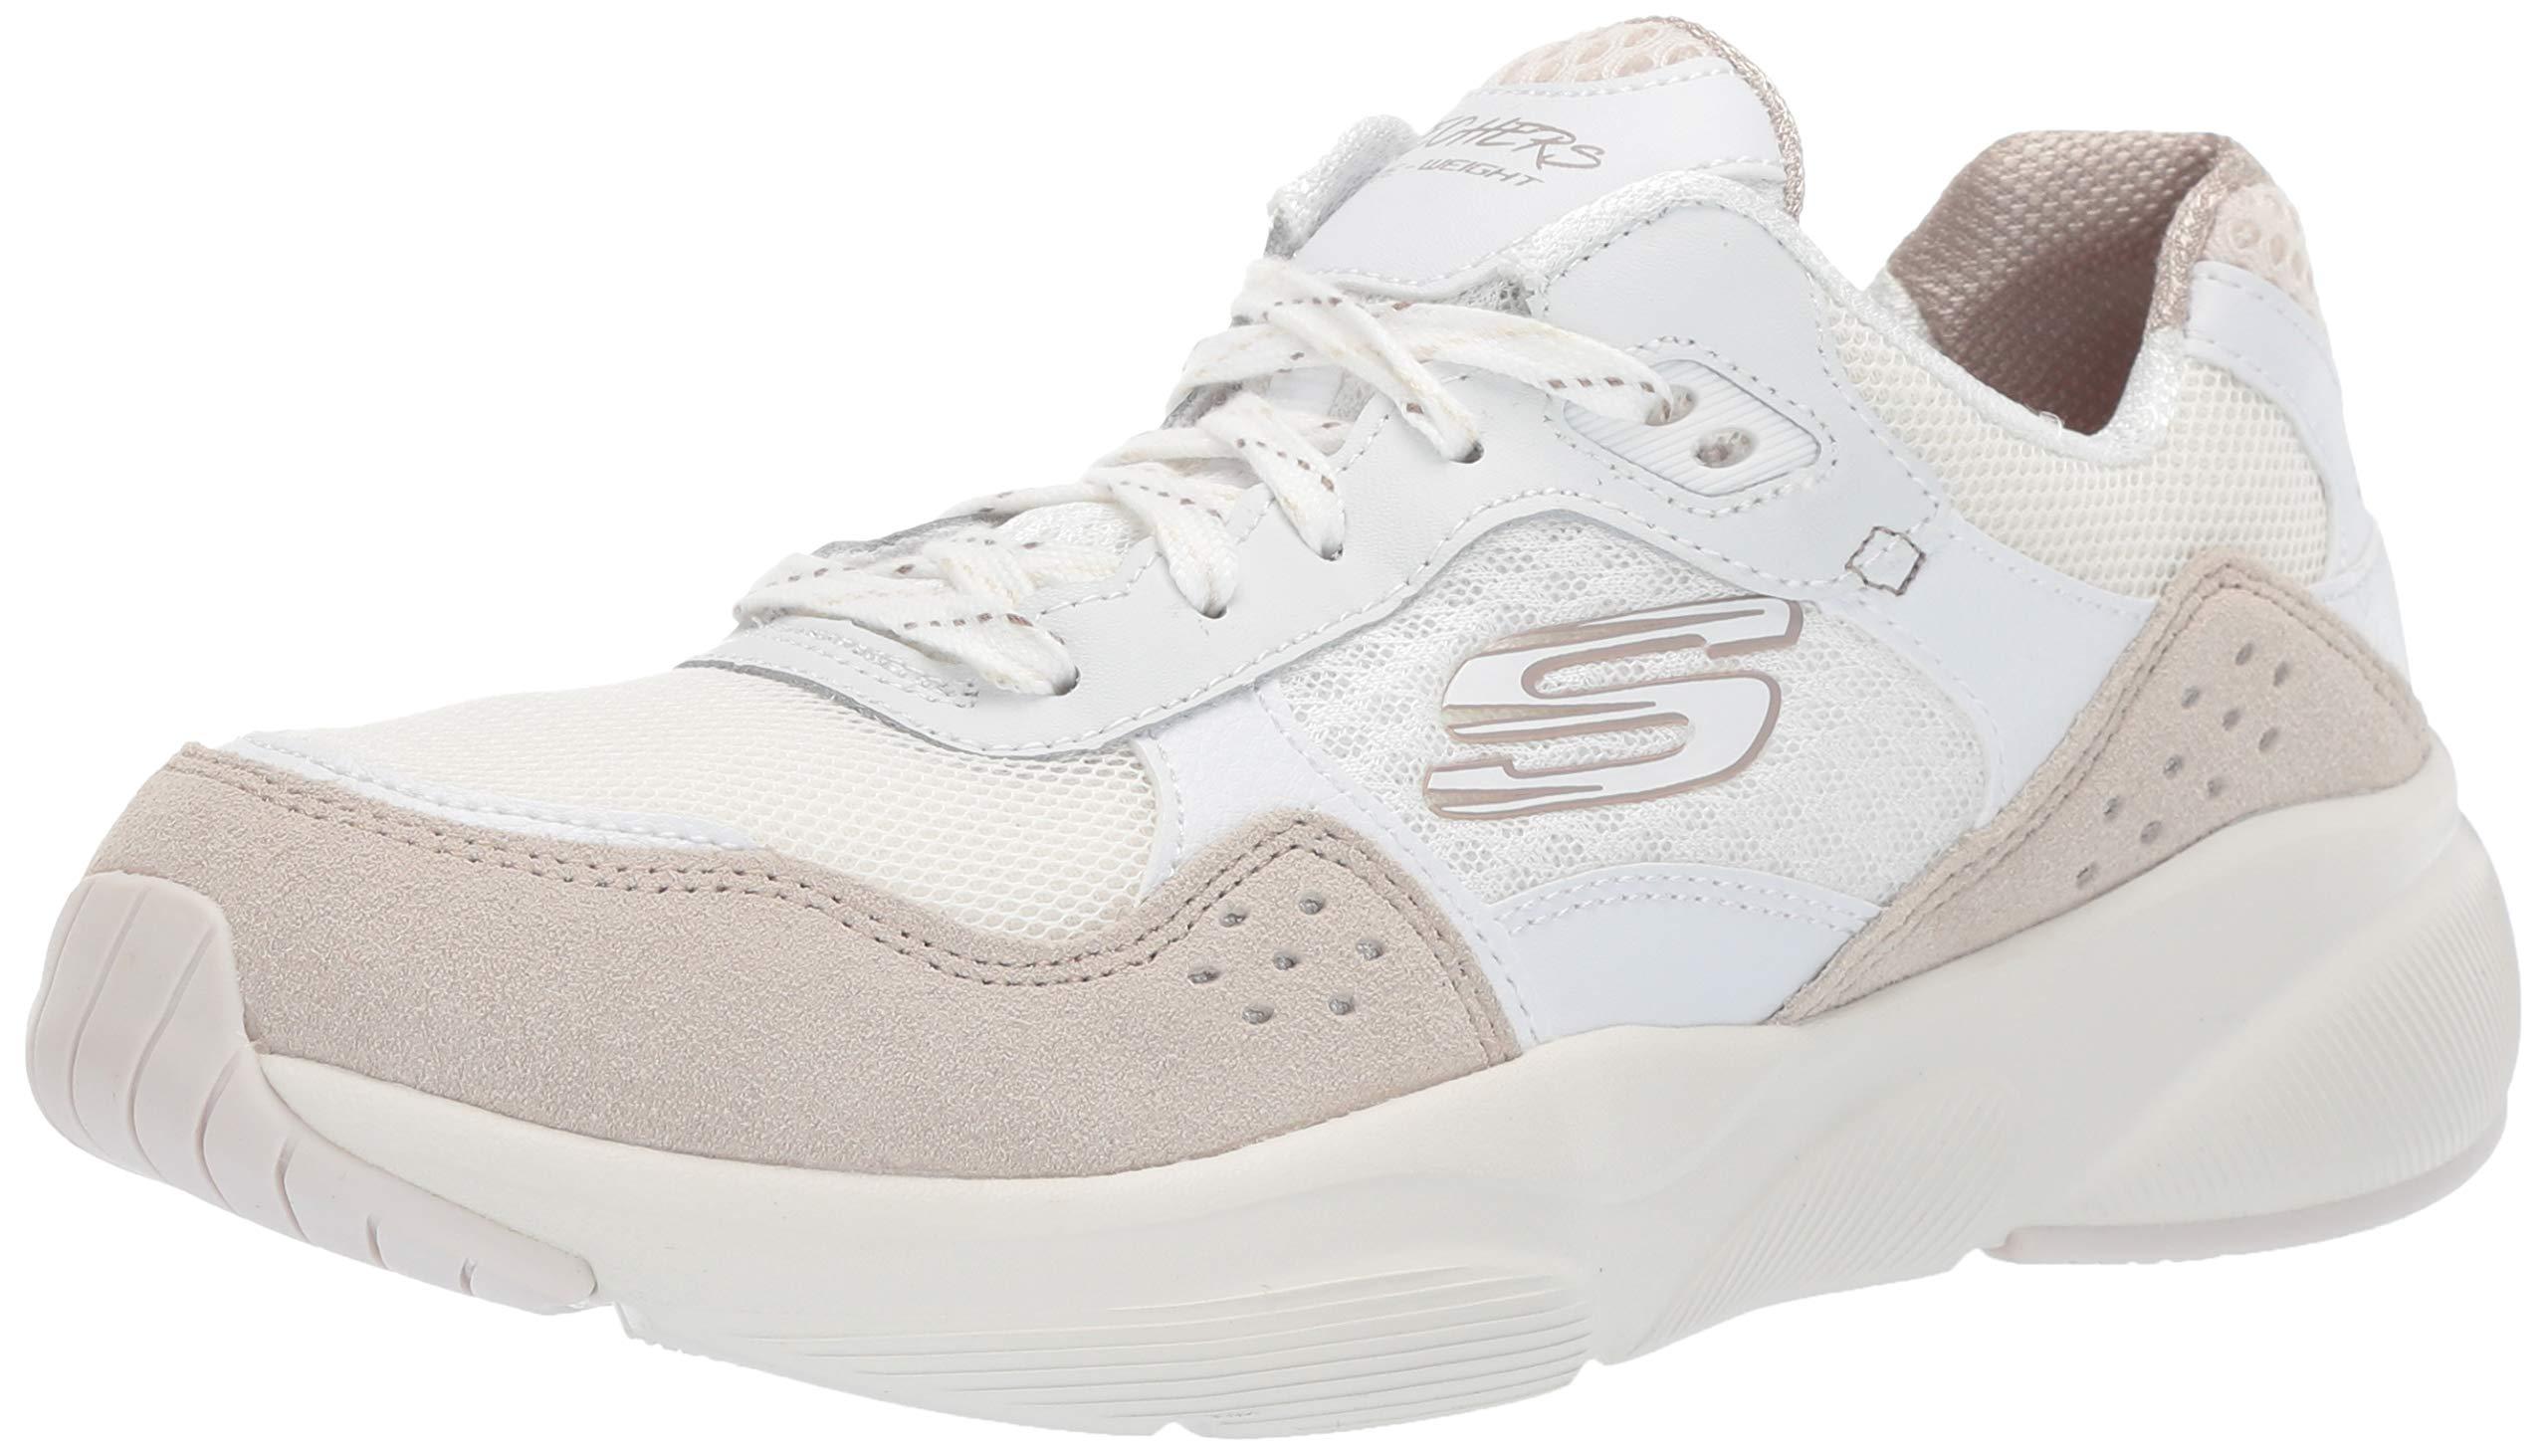 Skechers Rubber Meridian-charted Trainers in White Natural (White) - Save  29% - Lyst